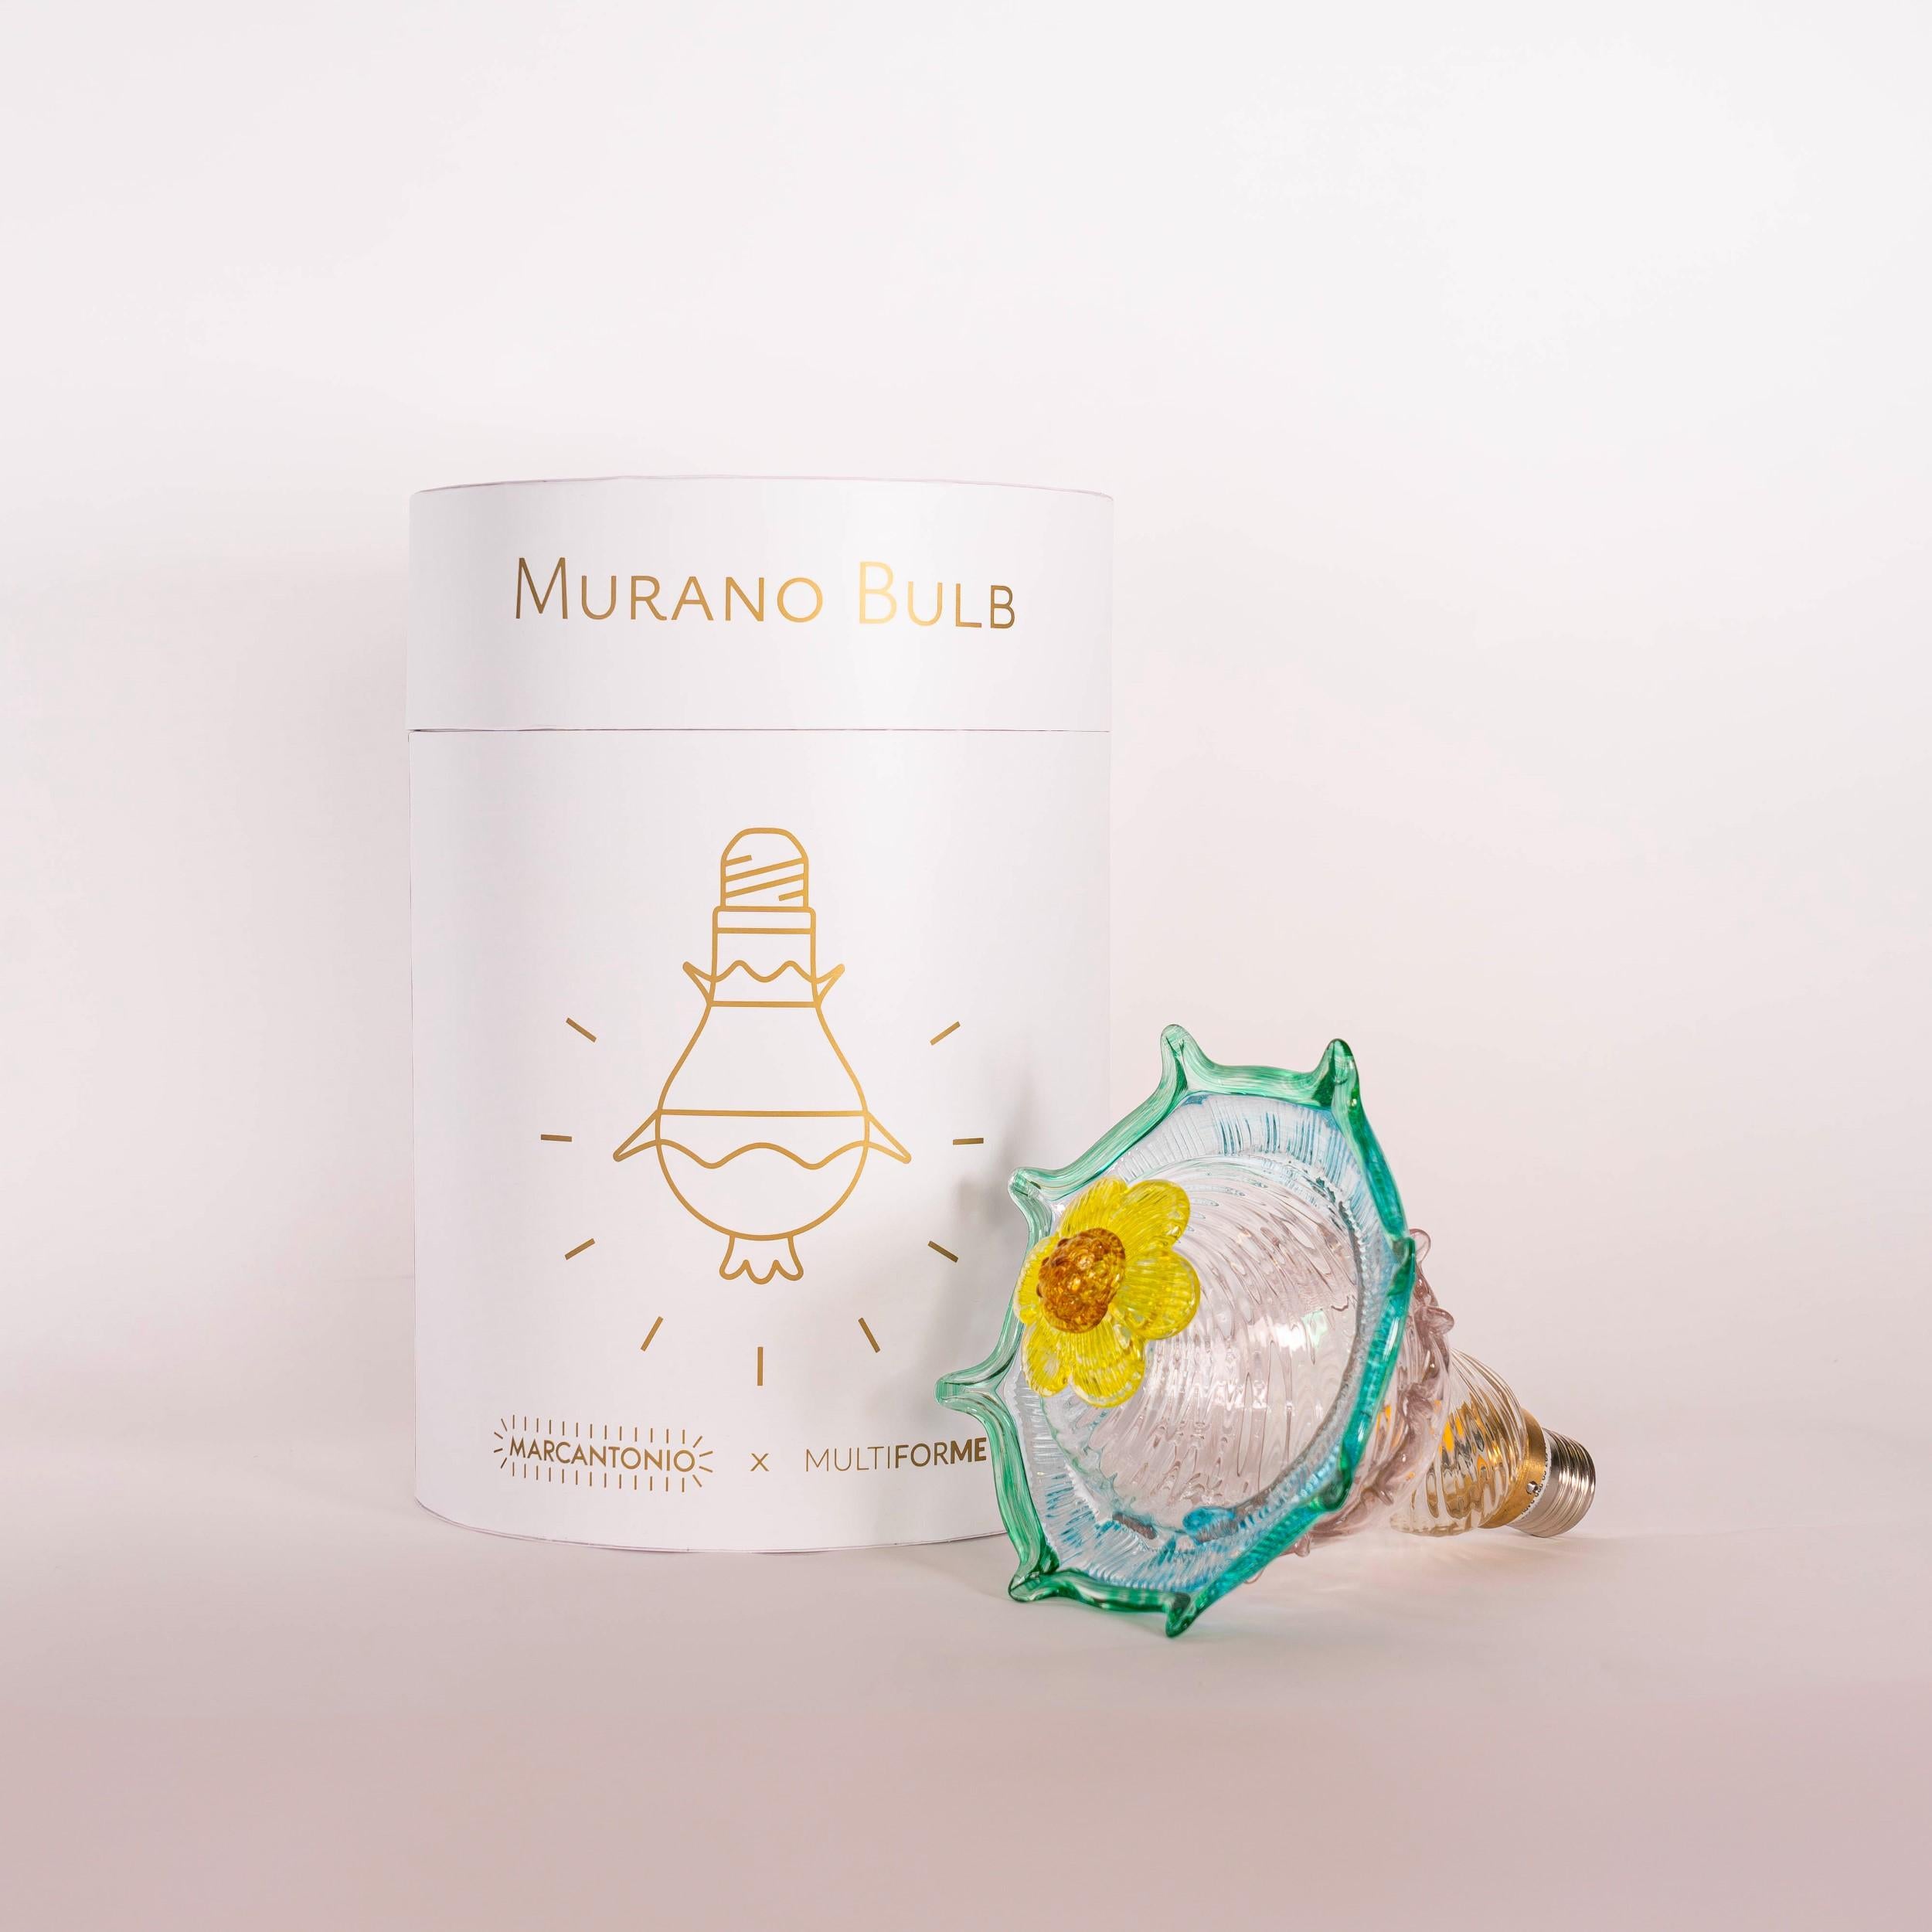 The art of Murano glass meets the iconicity of a bulb, together they give rise to a brilliant piece of furniture: a lightbulb, a chandelier or whatever your imagination suggests.

Murano Bulb, your lightbulb moment.

The Murano Bulb project designed